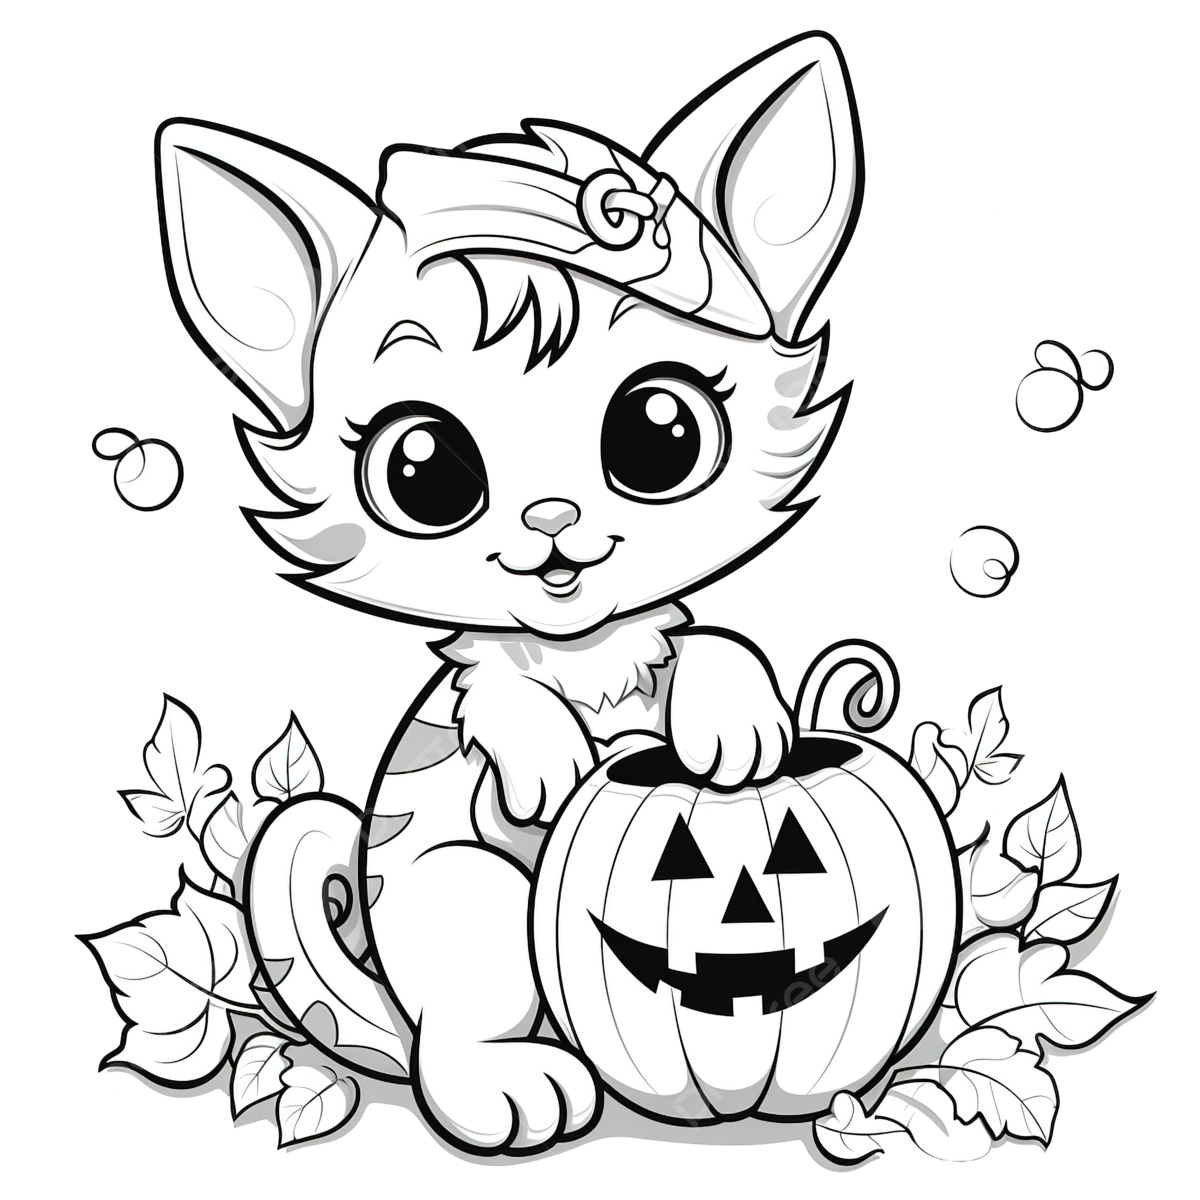 Halloween coloring page with cute black cat in pumpkin cat drawing pumpkin drawing halloween drawing png transparent image and clipart for free download